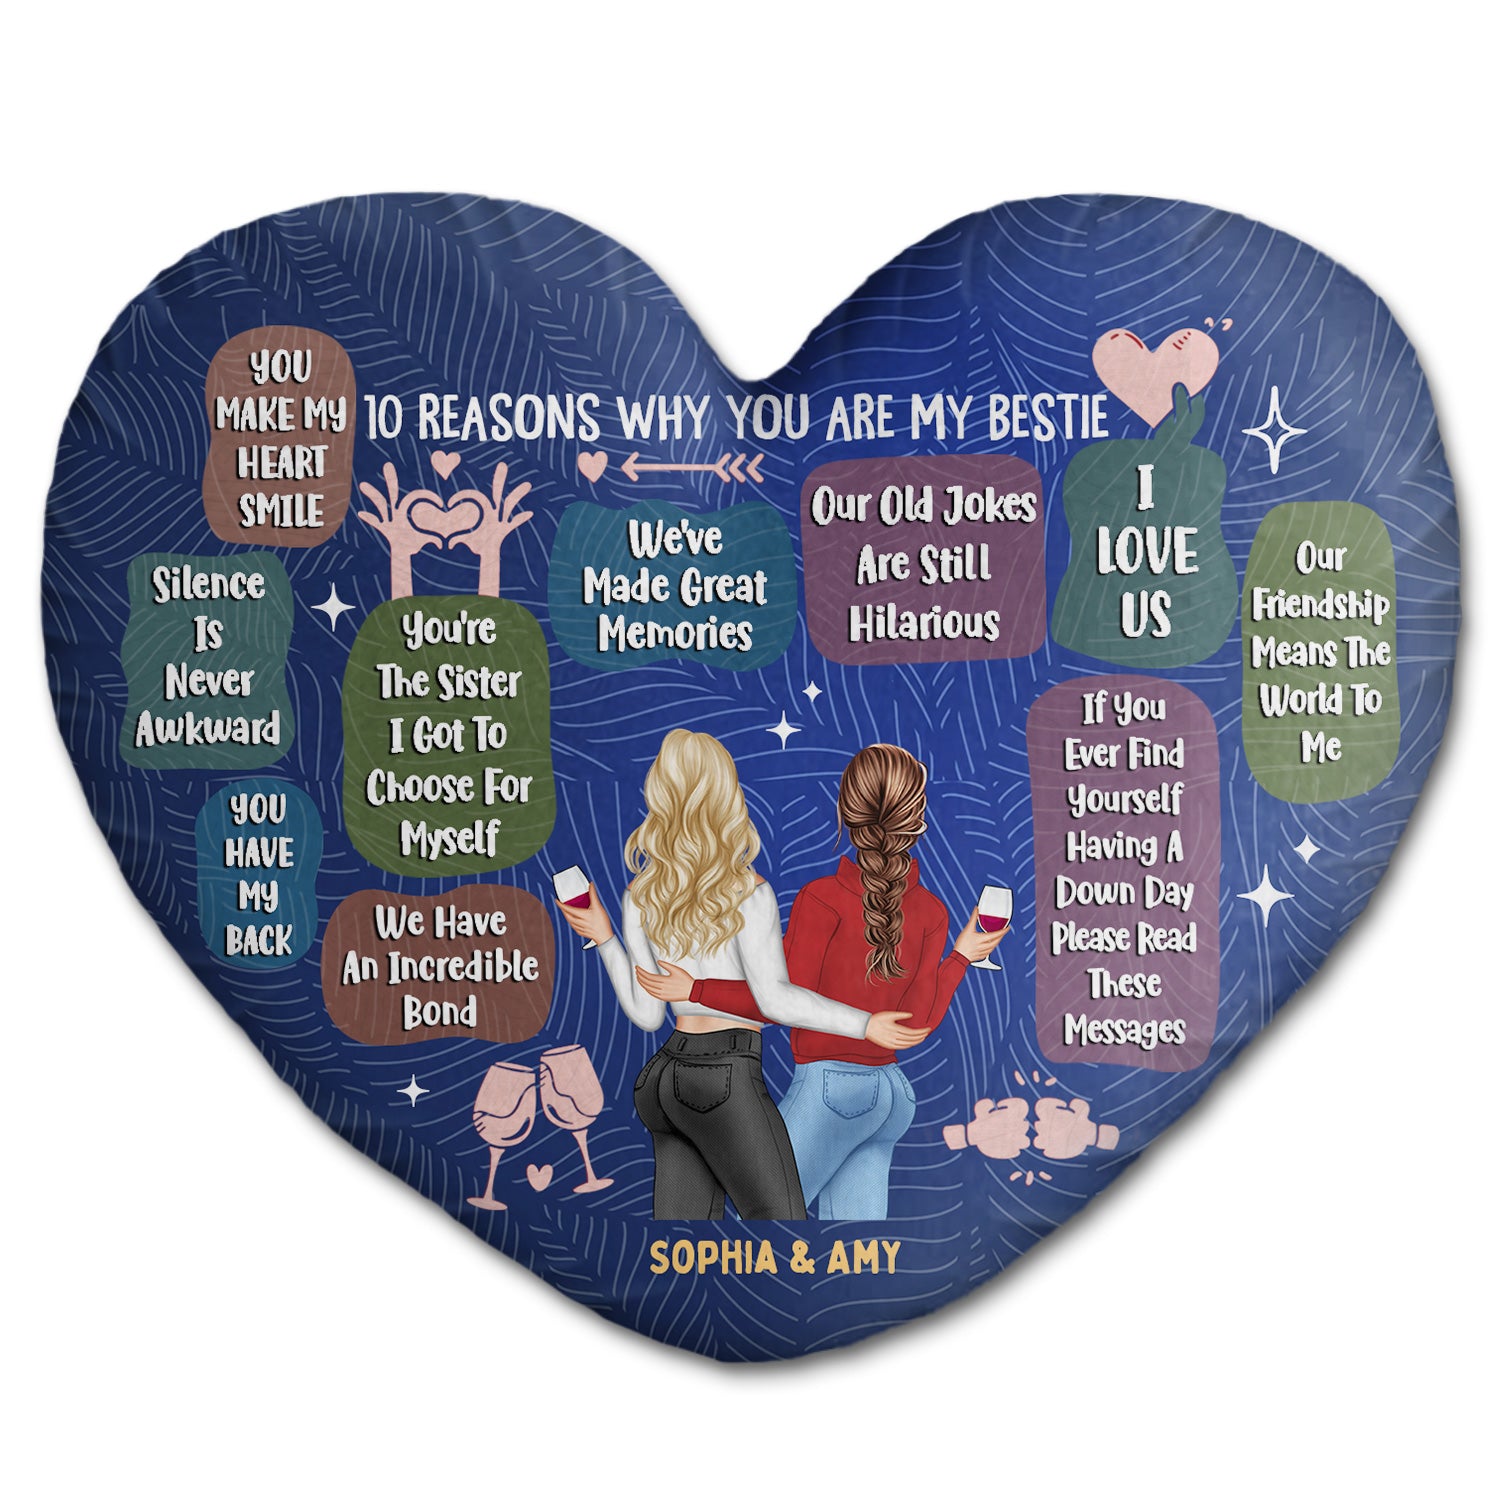 10 Reasons Why You Are My Bestie - Holiday, Birthday, Loving Gift For Friends, Colleagues - Personalized Heart Shaped Pillow